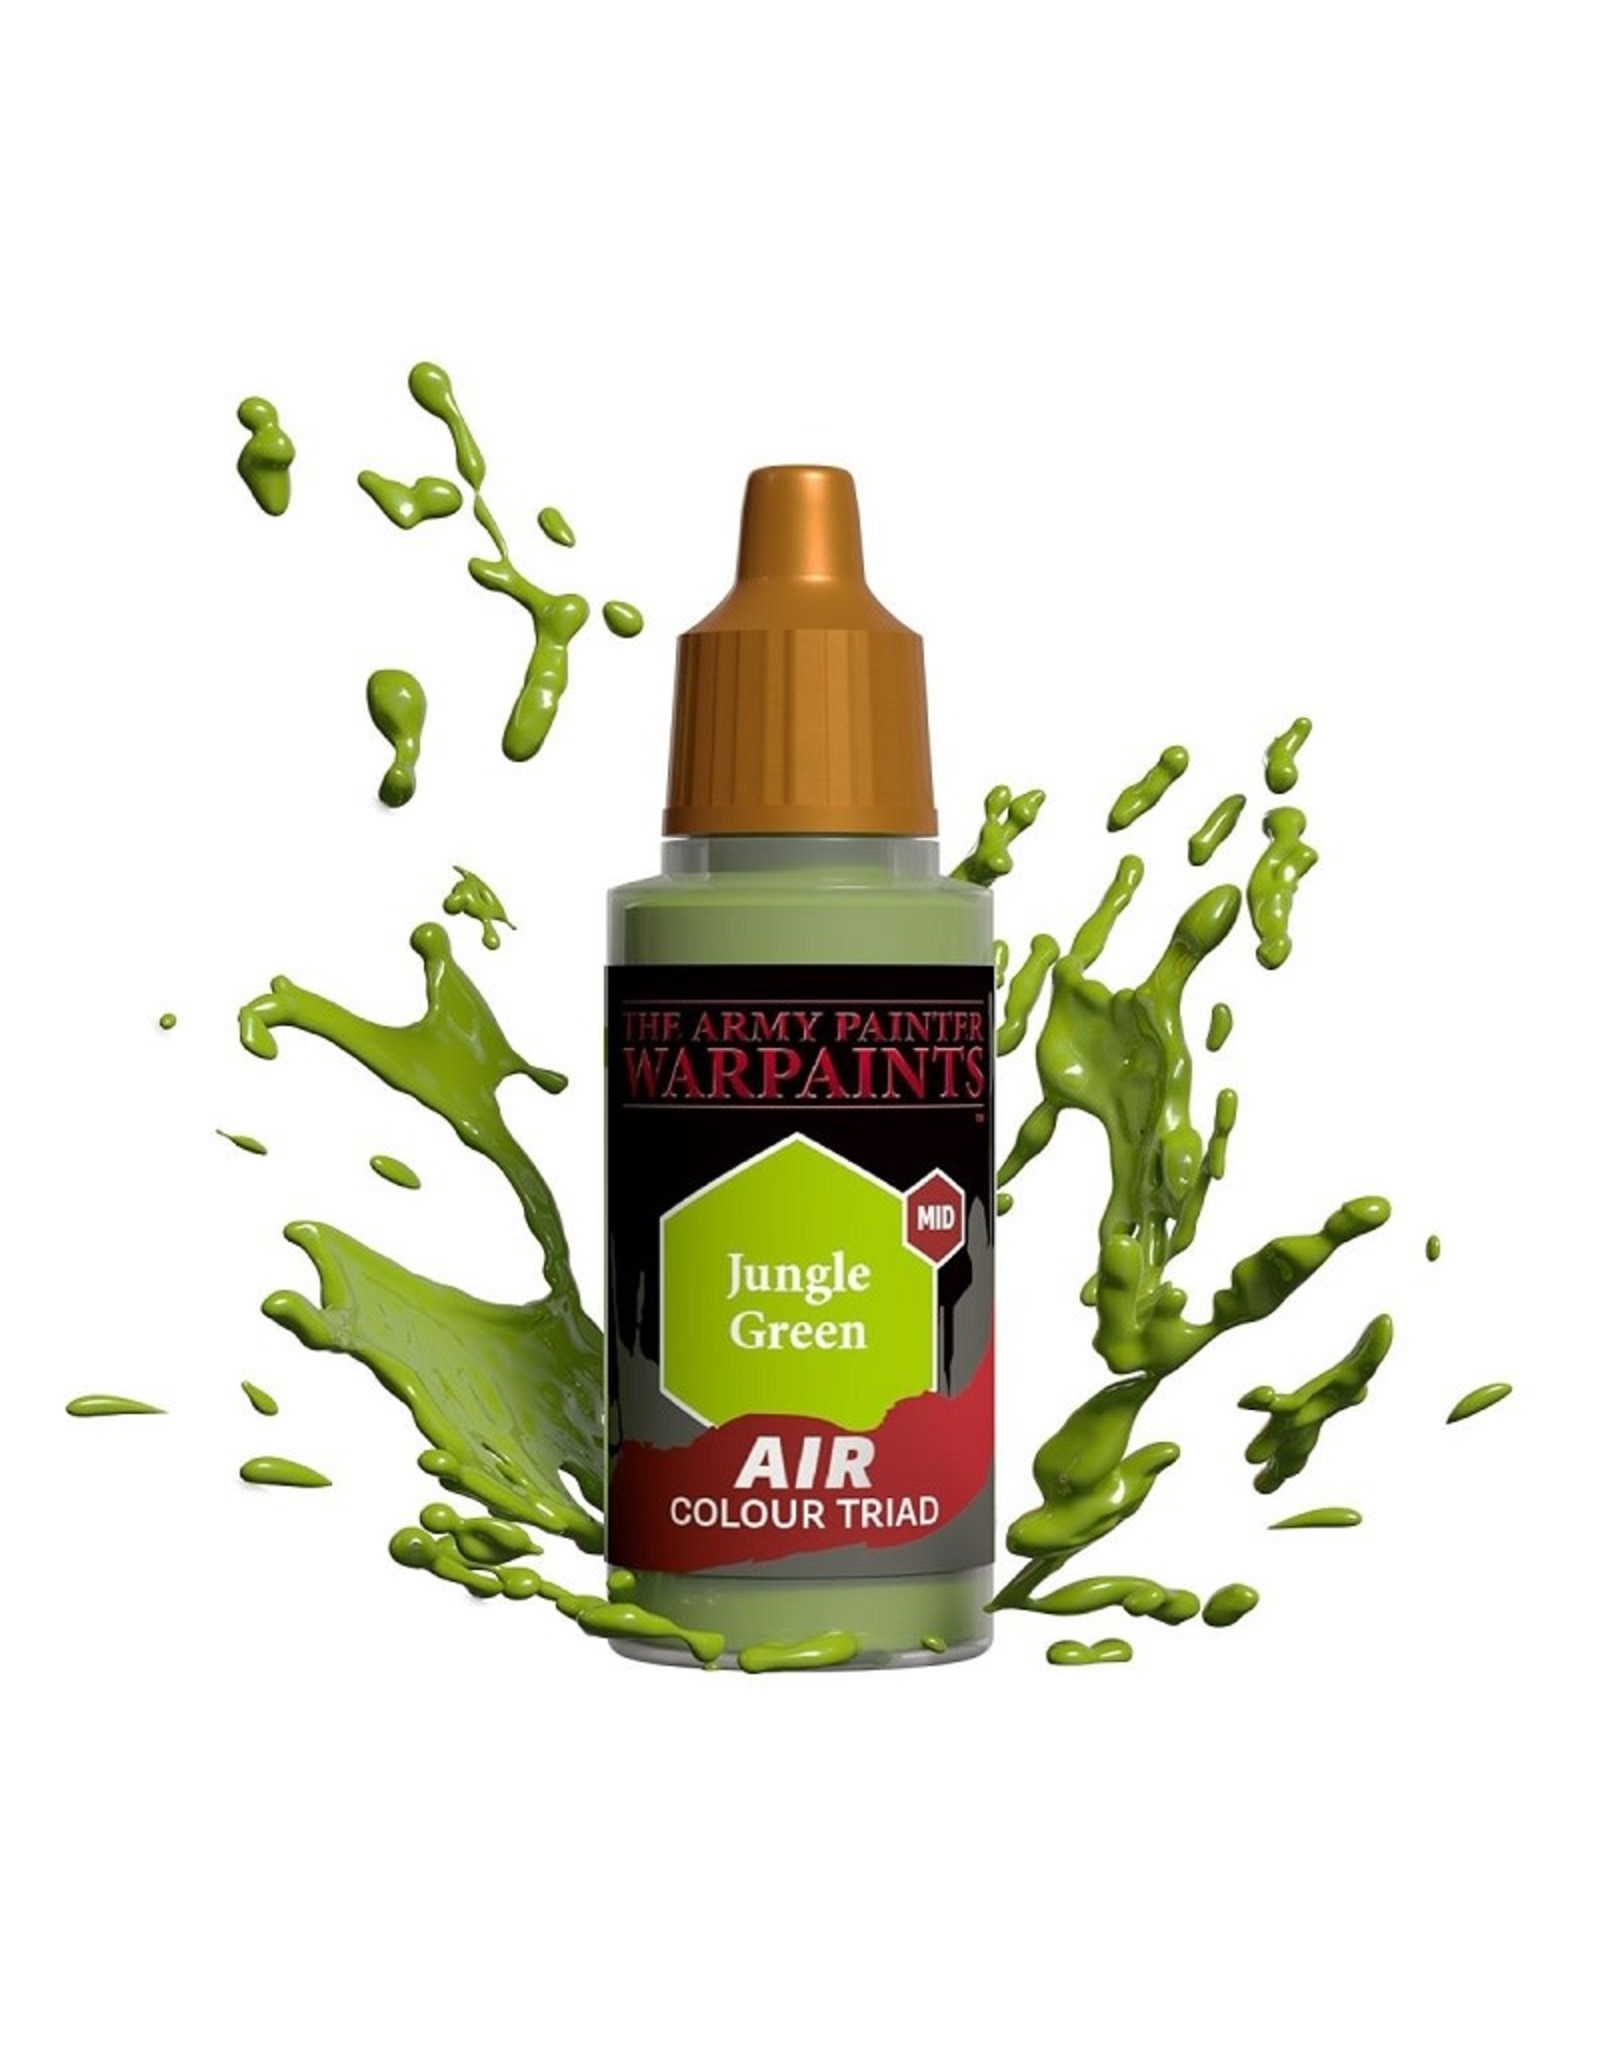 The Army Painter Warpaint Air: Jungle Green (18ml)